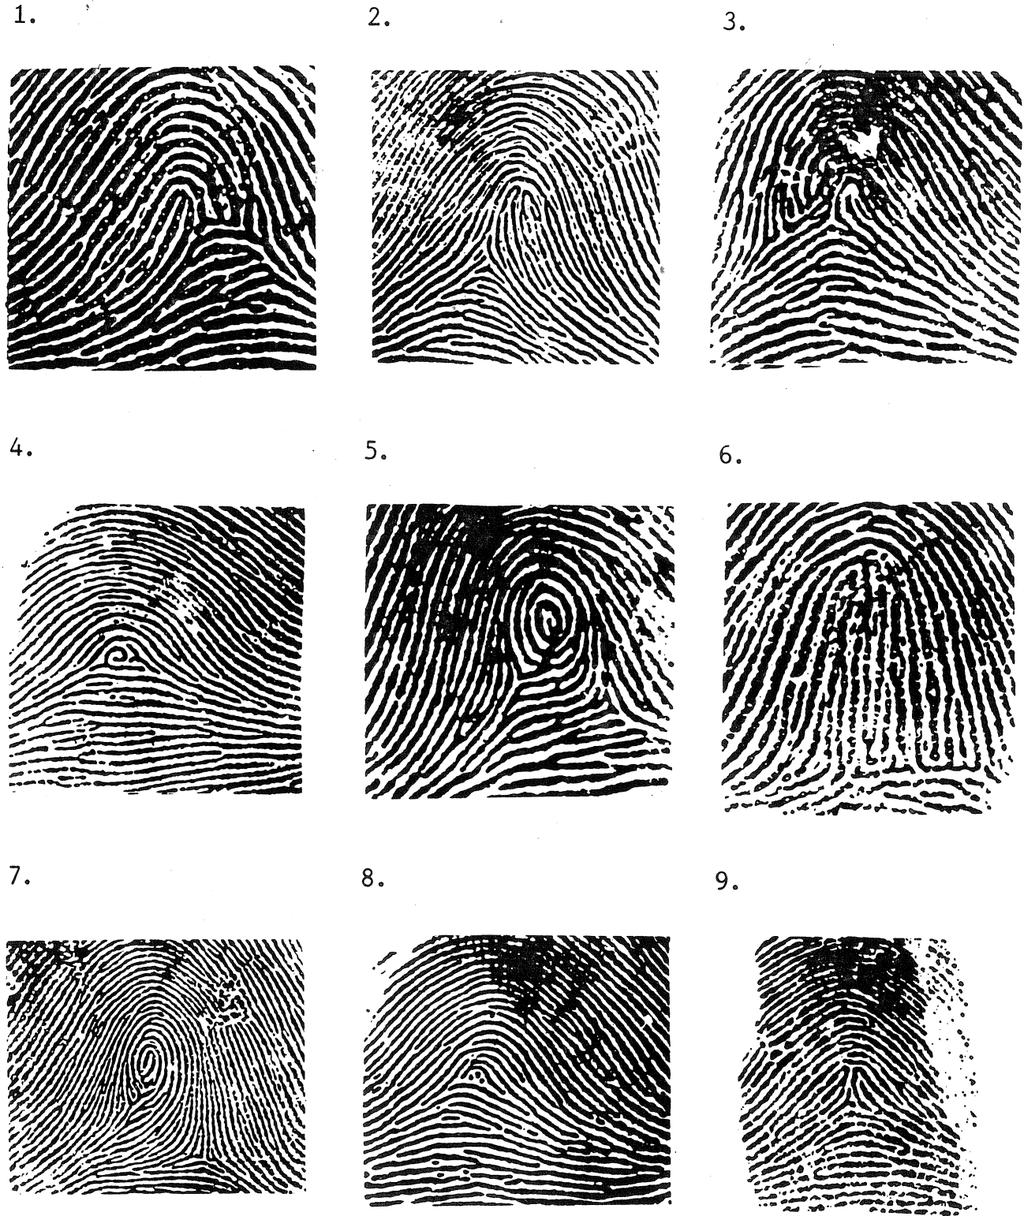 TP Basic Fingerprint Training Manual Section 6 - Classification - Reference Rules Automatic